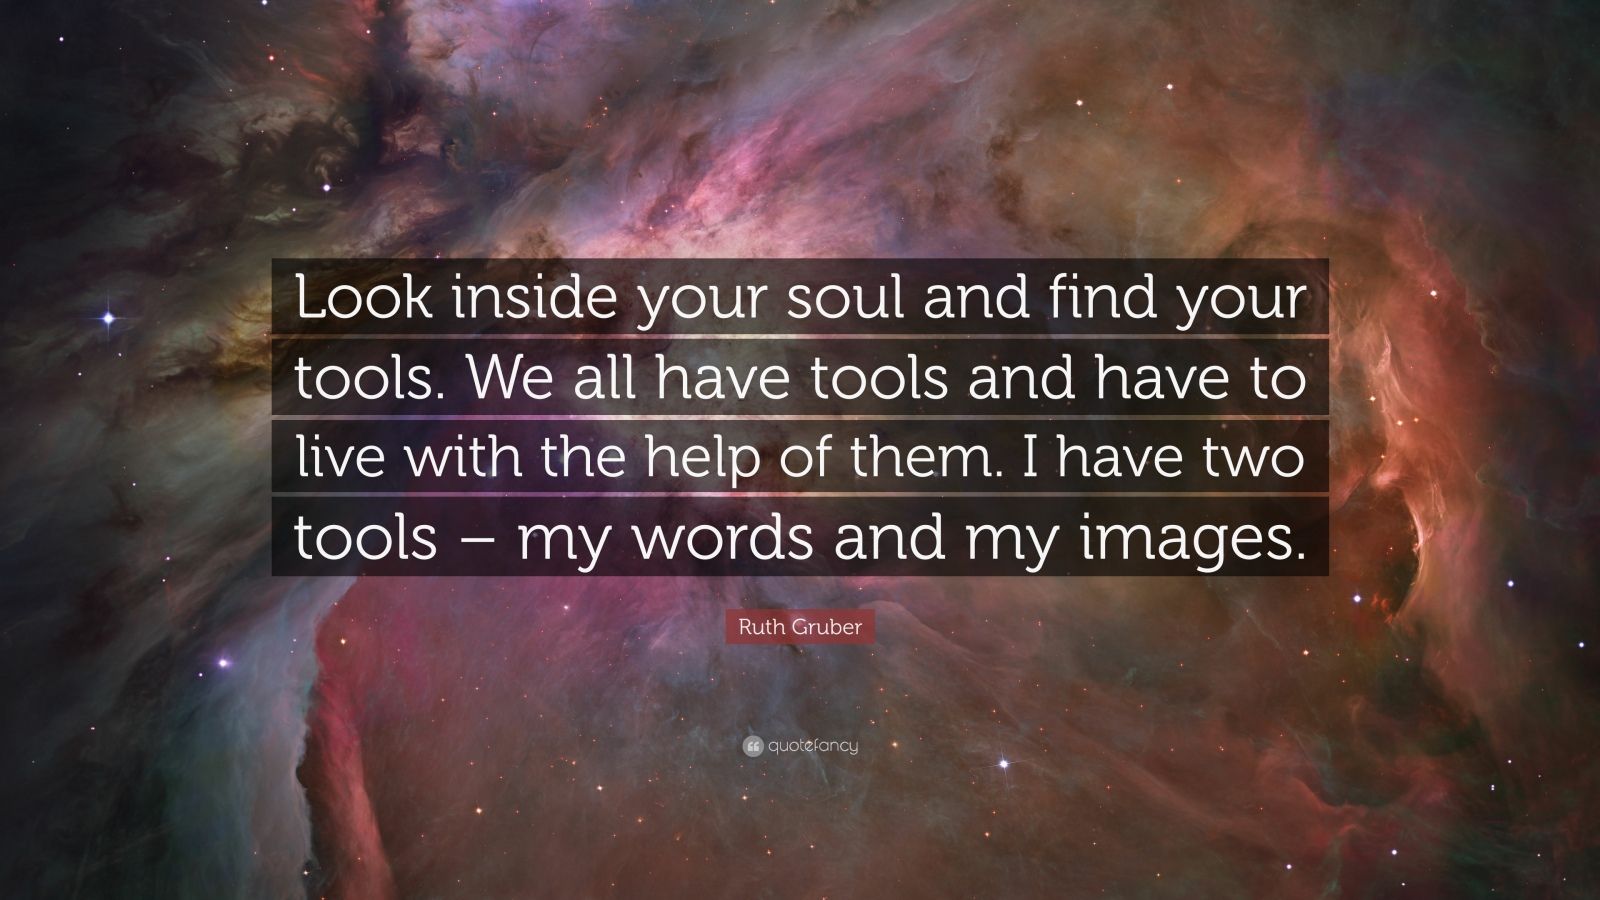 Ruth Gruber Quote: “Look inside your soul and find your tools. We all